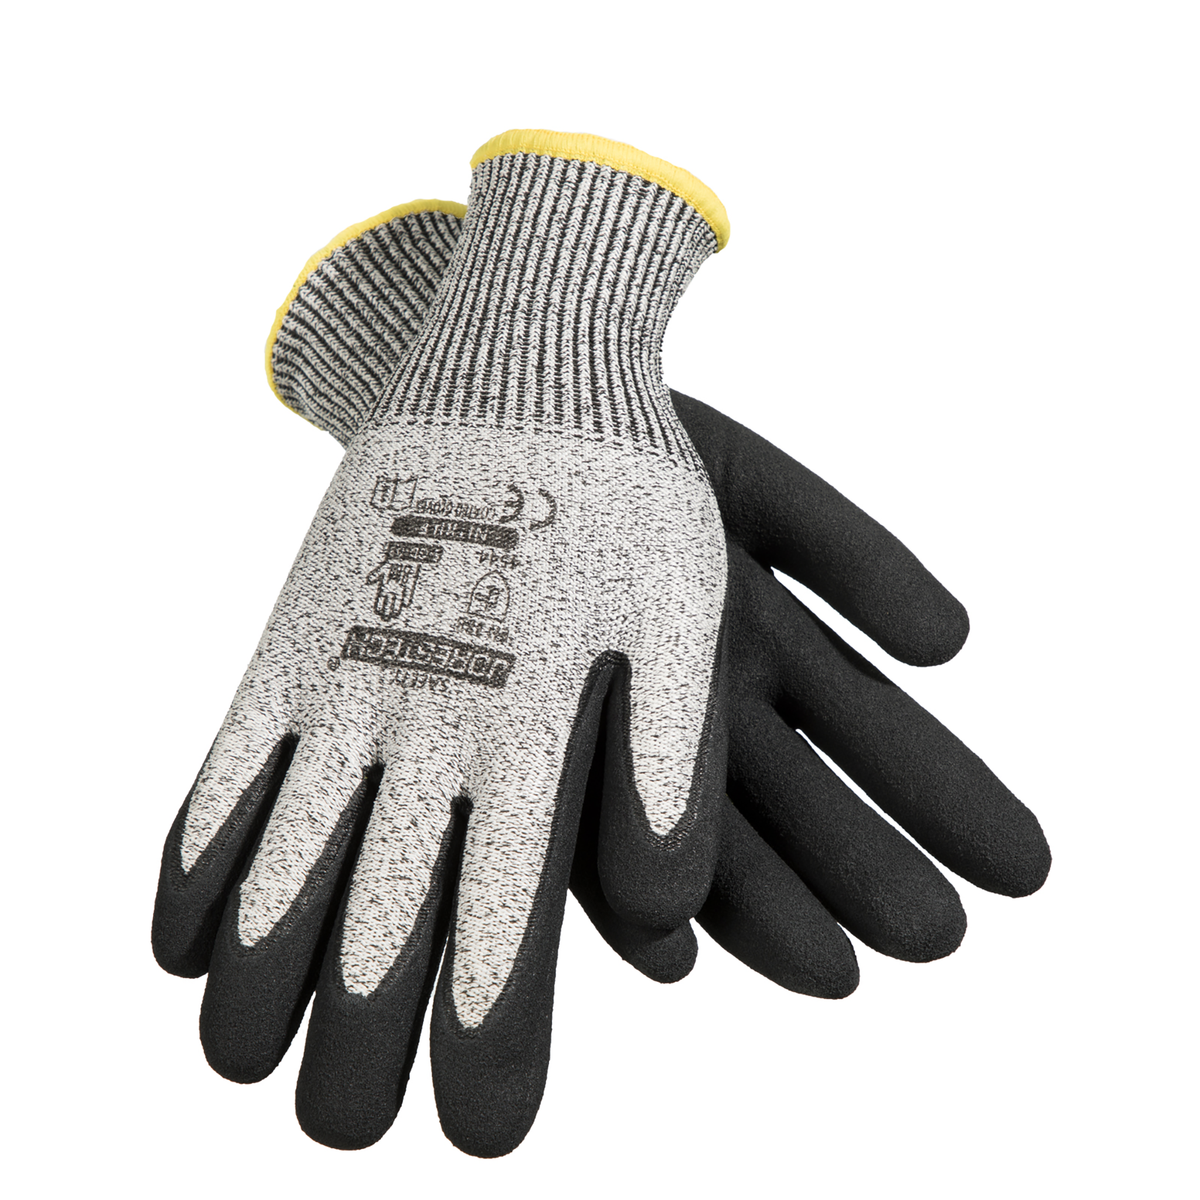 Nitrile Foam Gloves with A3 Cut Resistance